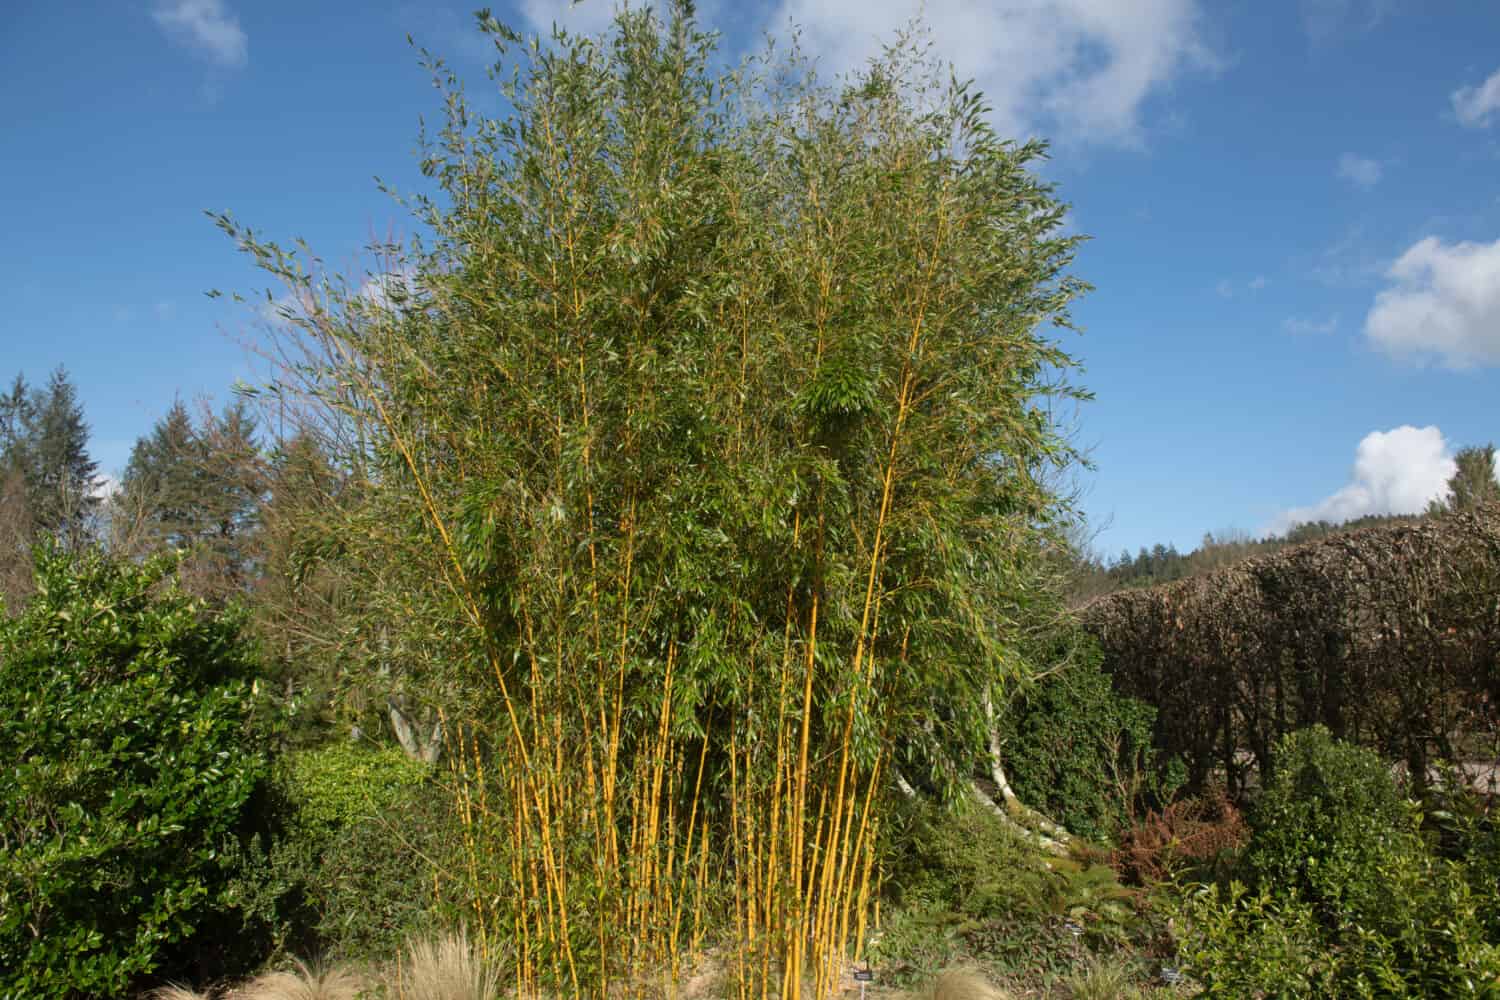 Winter Sun on the Evergreen Showy Yellow Groove Bamboo Plant (Phyllostachys aureosulcata f. spectabilis) Growing in a Garden in Rural Devon, England, UK